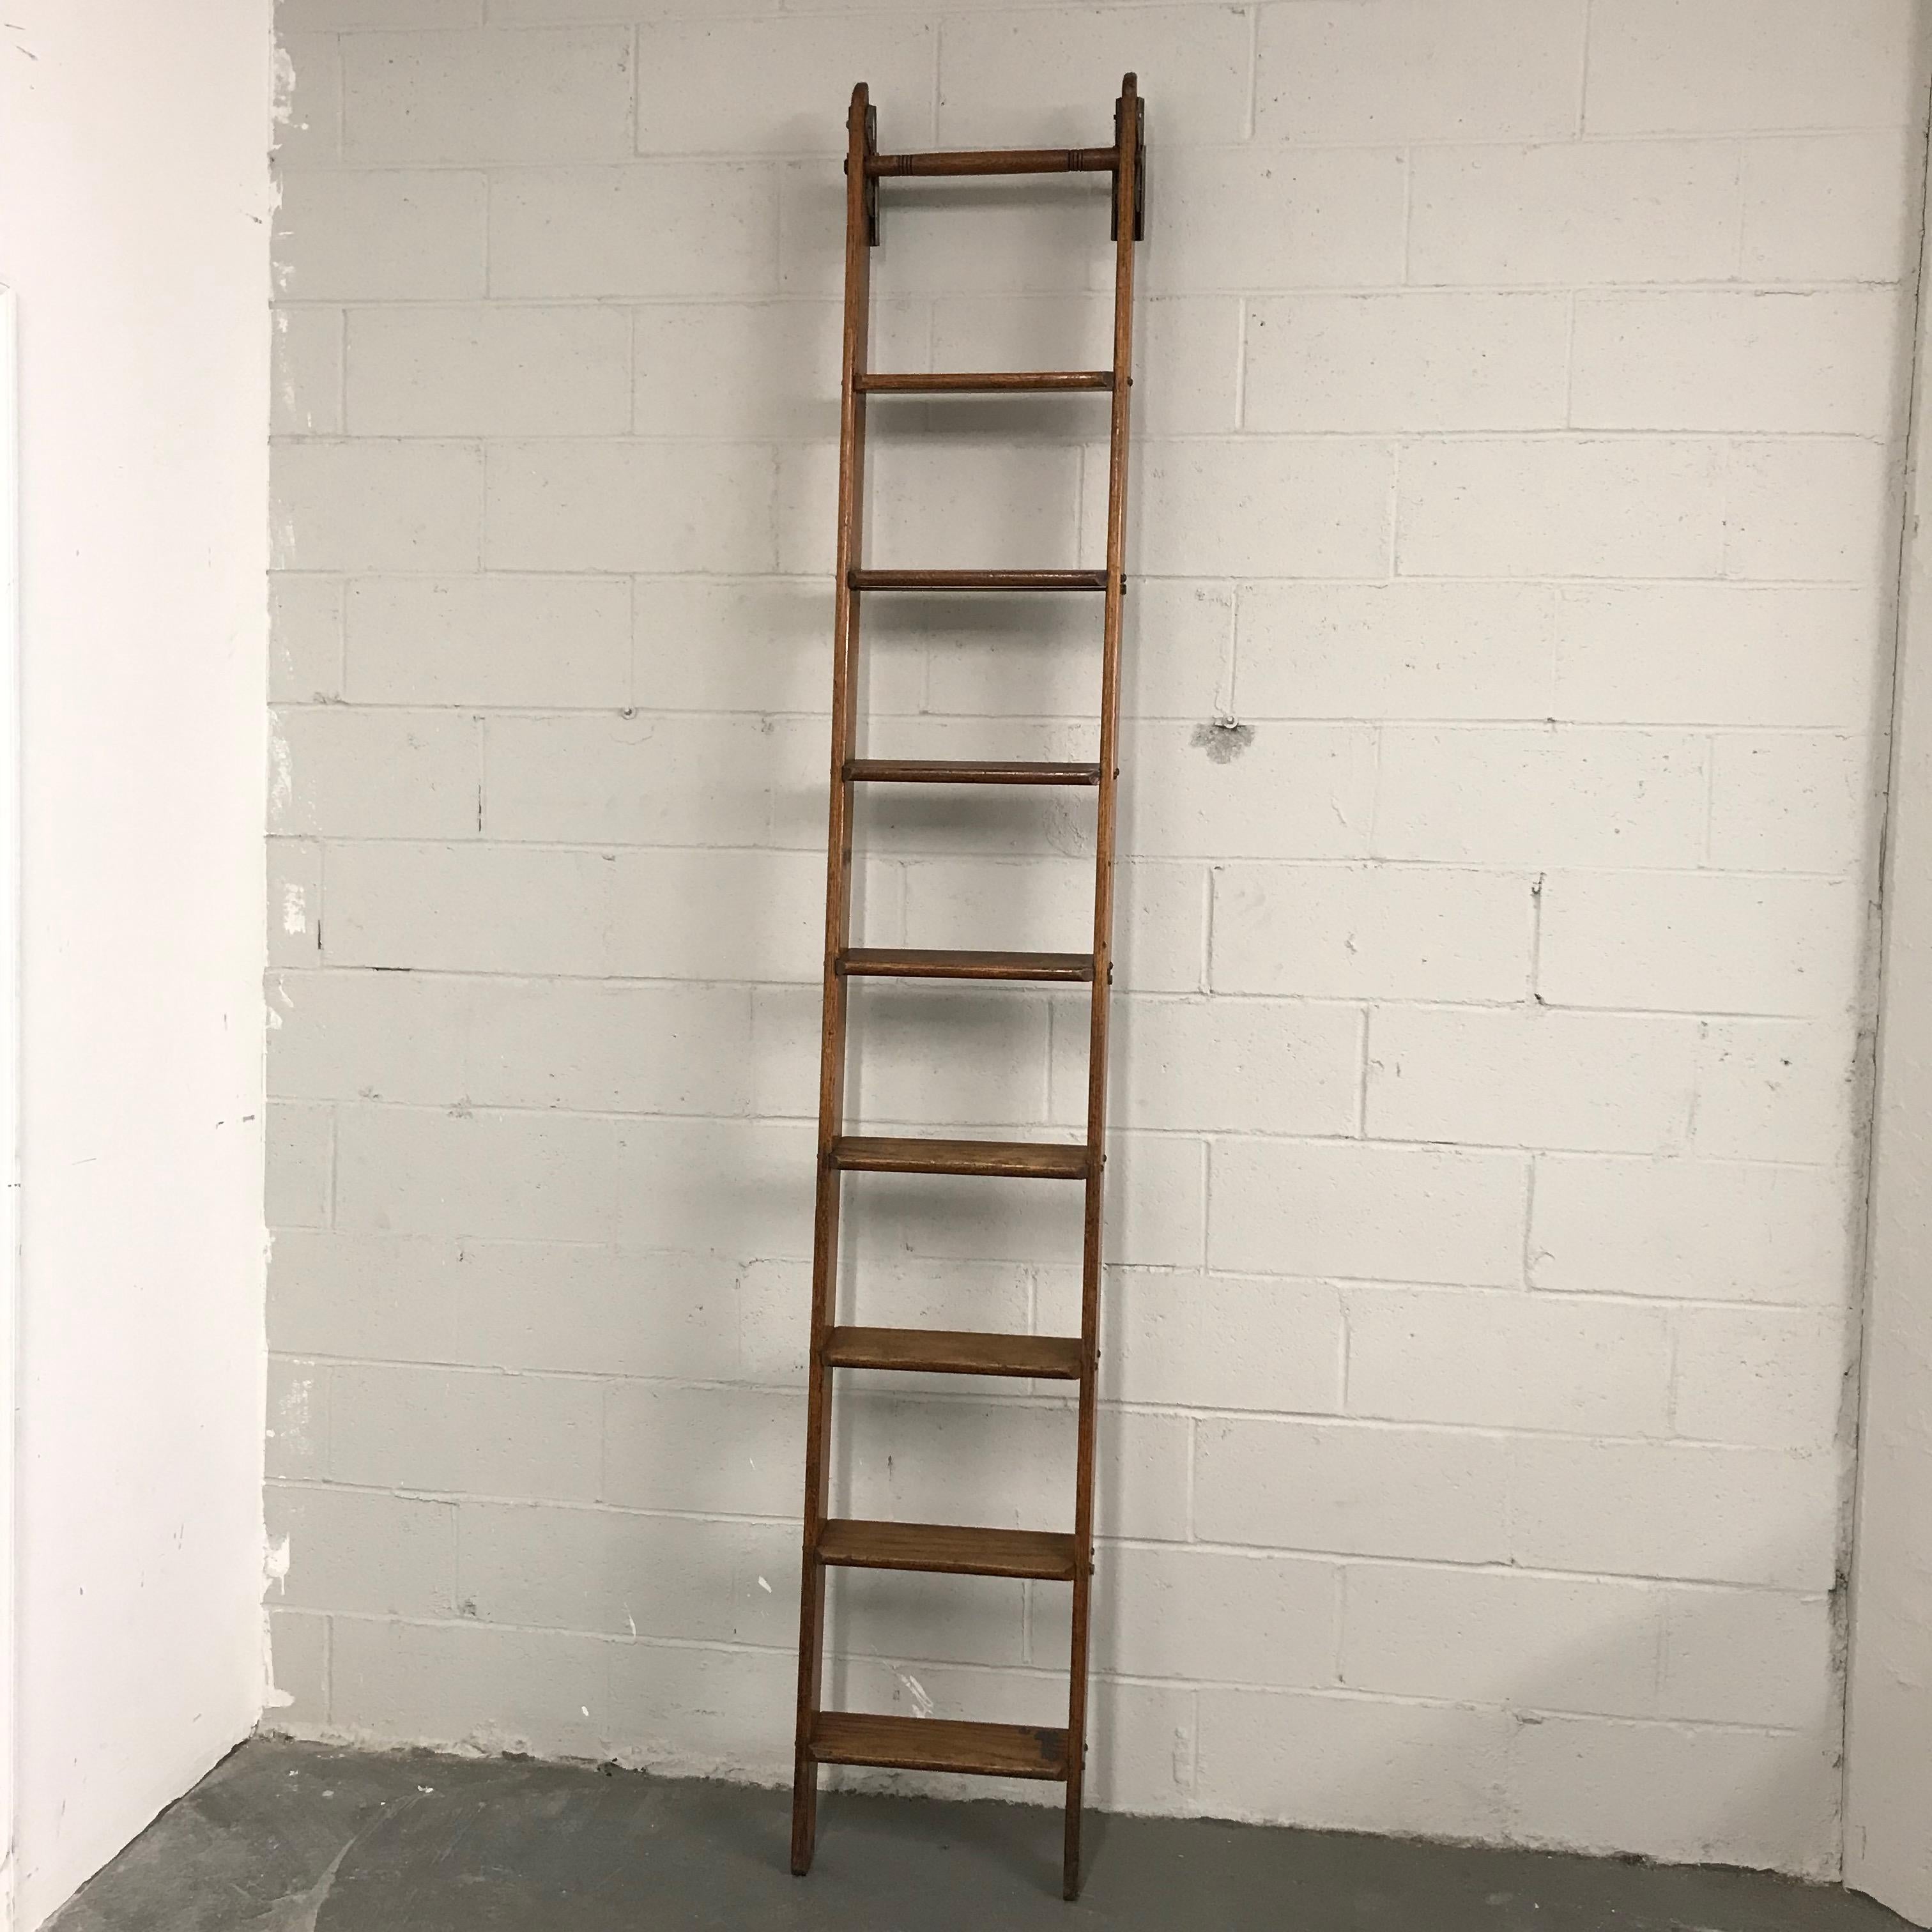 Industrial, oak library ladder by Putnam features decorative steel hooks at the top. The rungs are 4 inches wide.